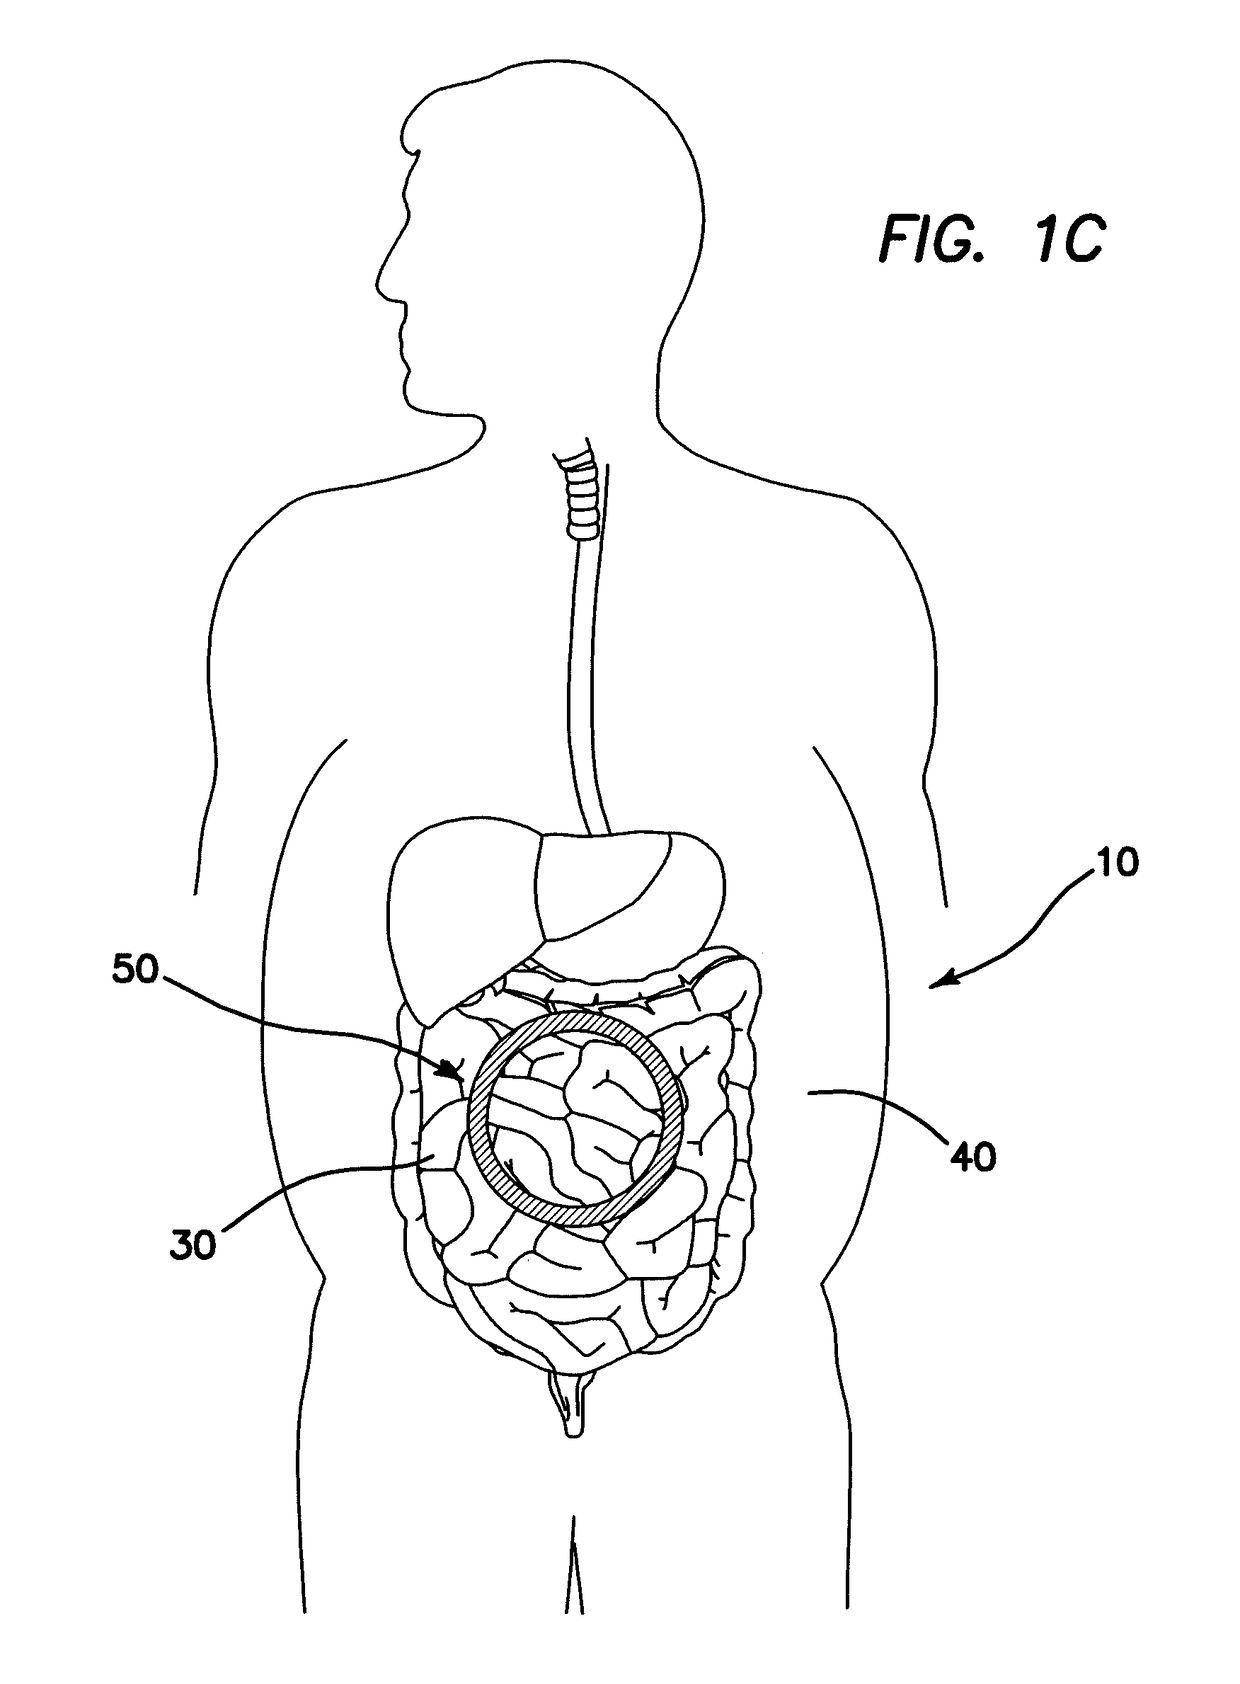 Surgical access device comprising internal retractor